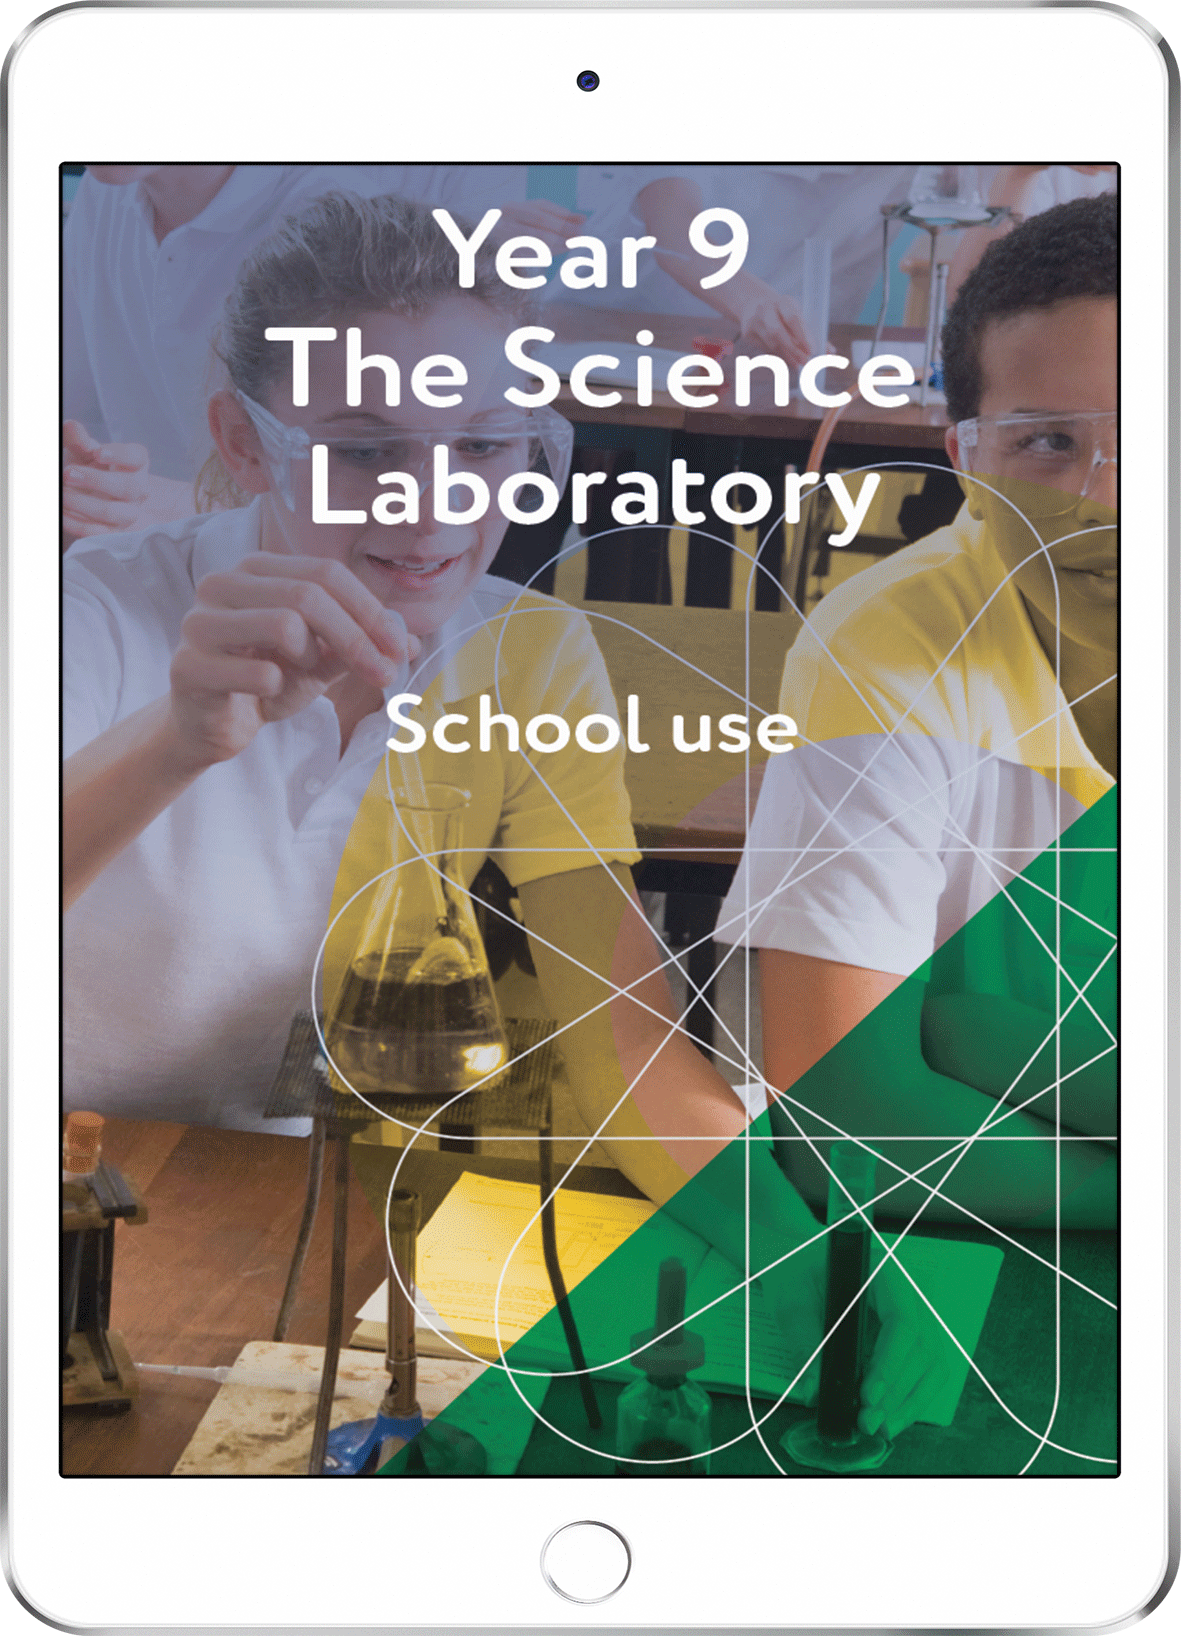 Year 9 The Science Laboratory - School Use